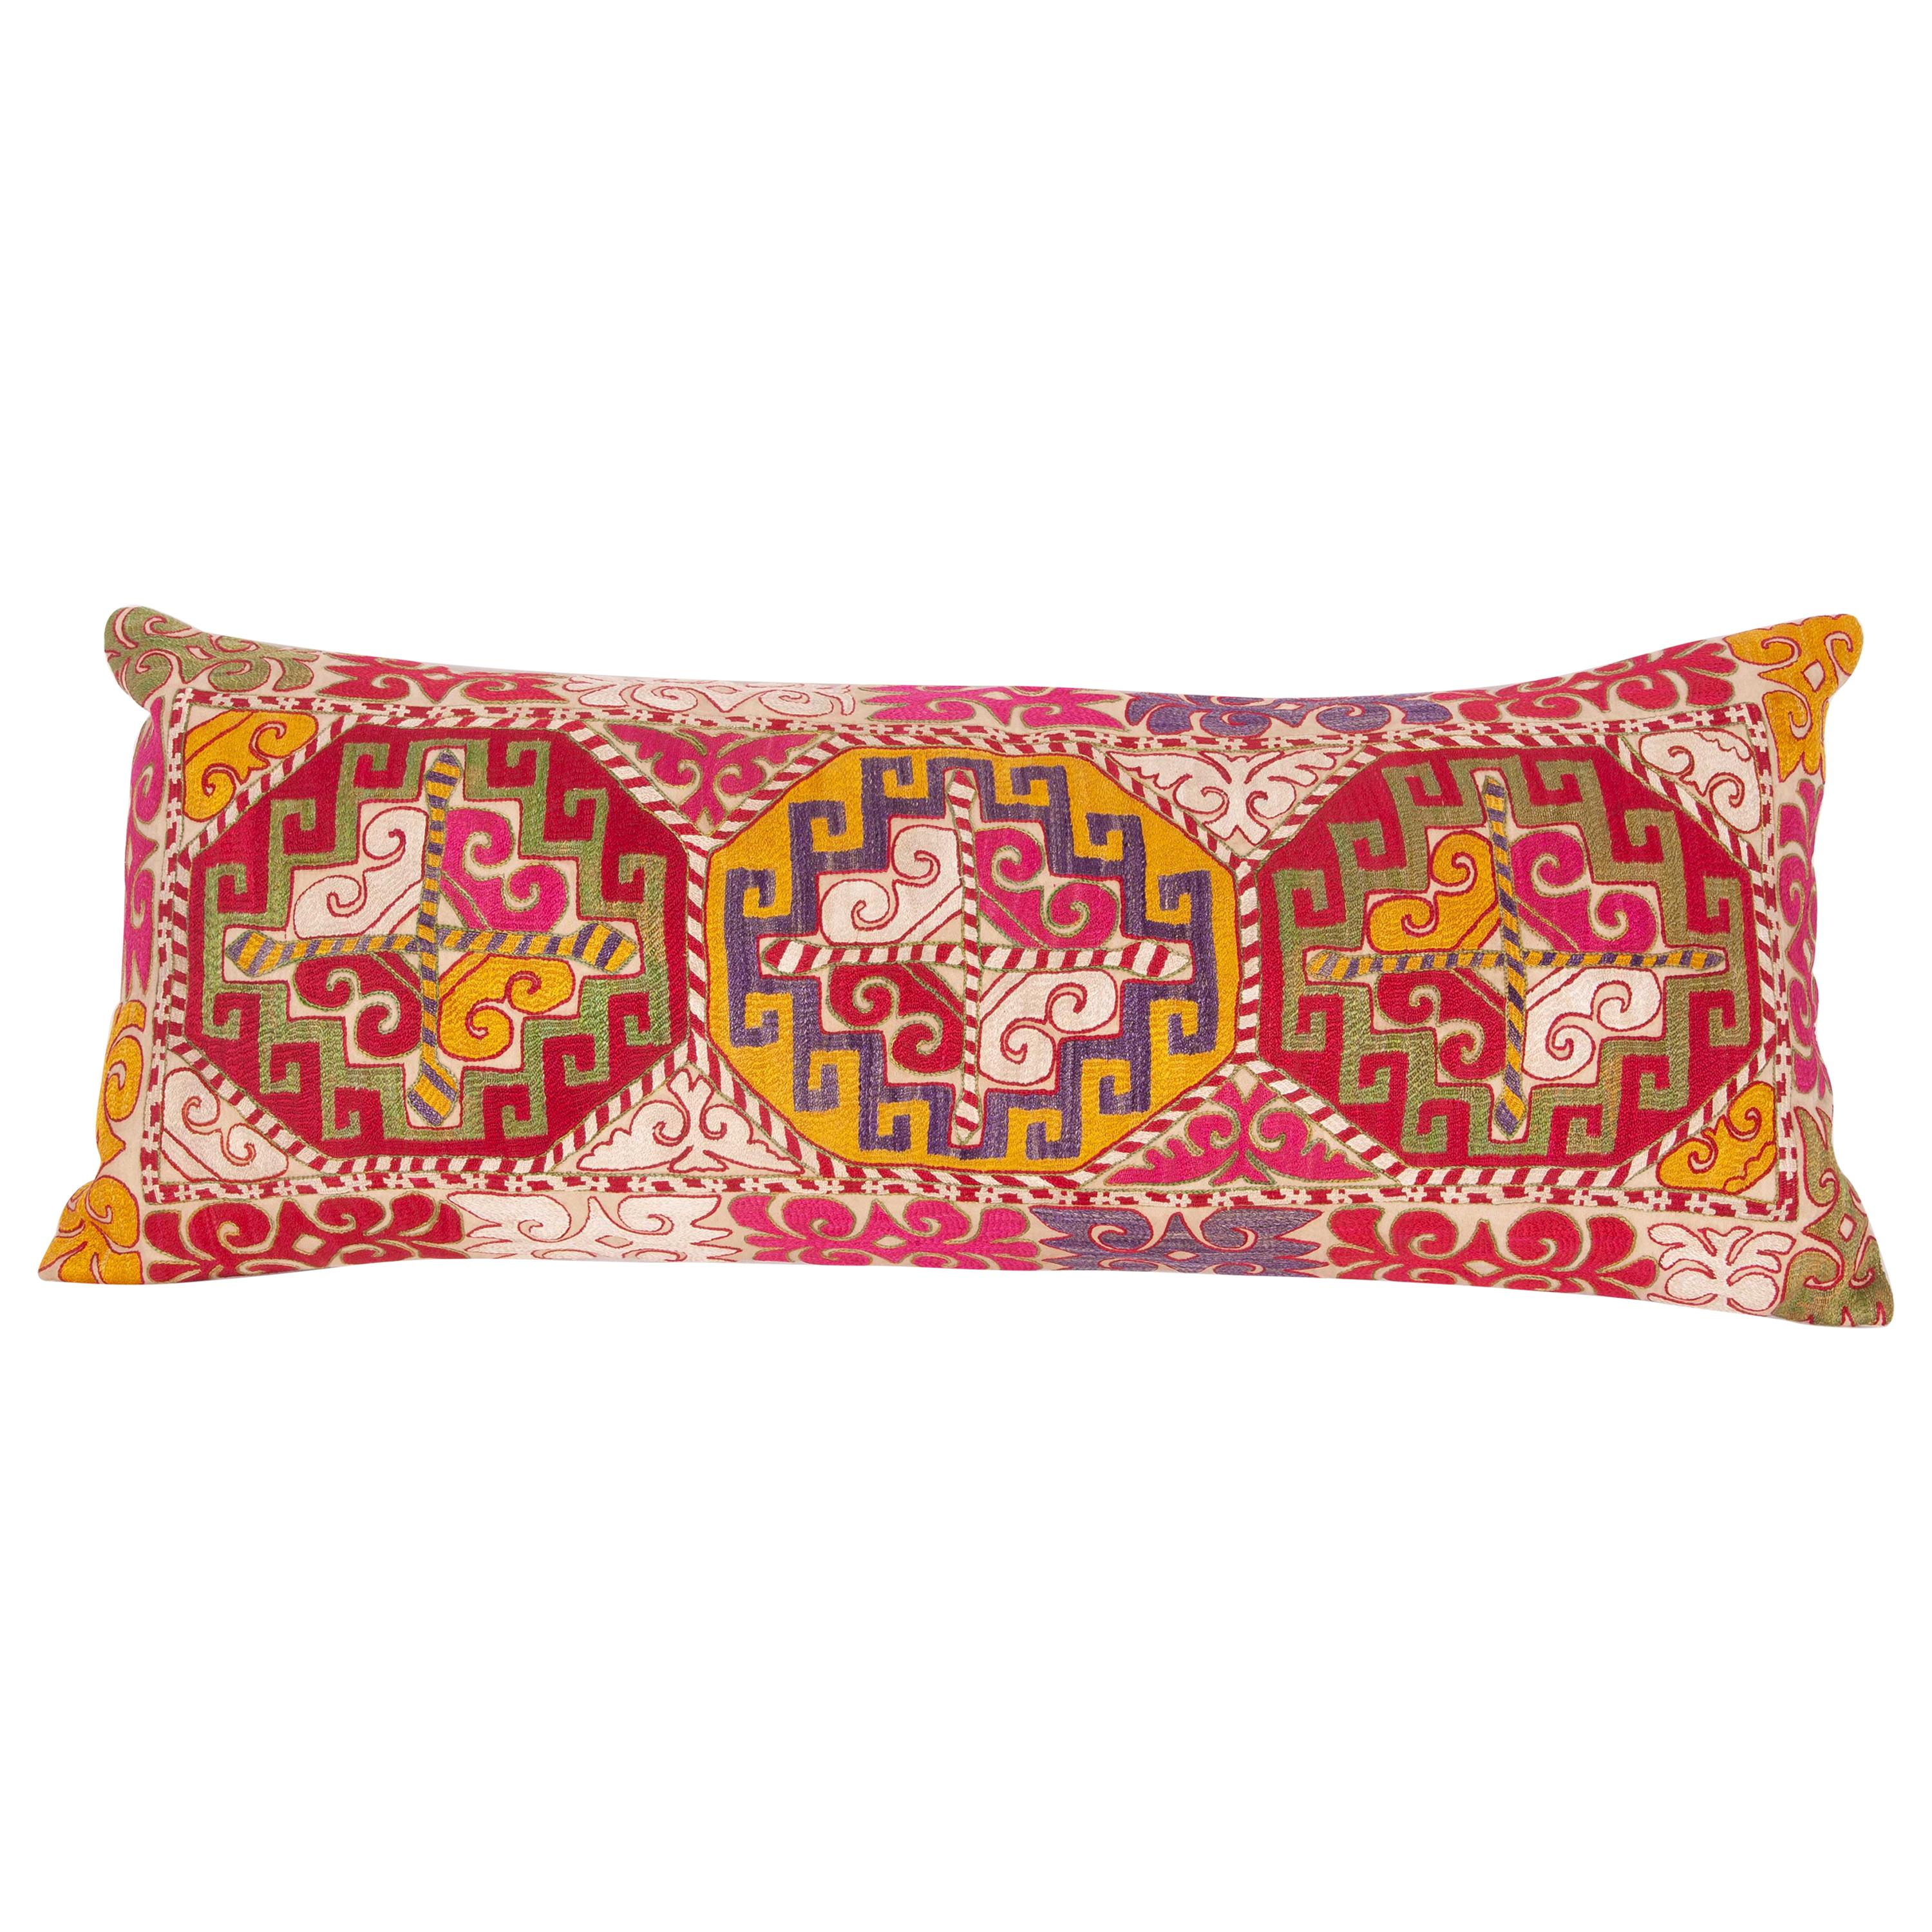 Lumbar Pillow Case Fashioned from an Uzbek Embroidered Mafrash Panel For Sale